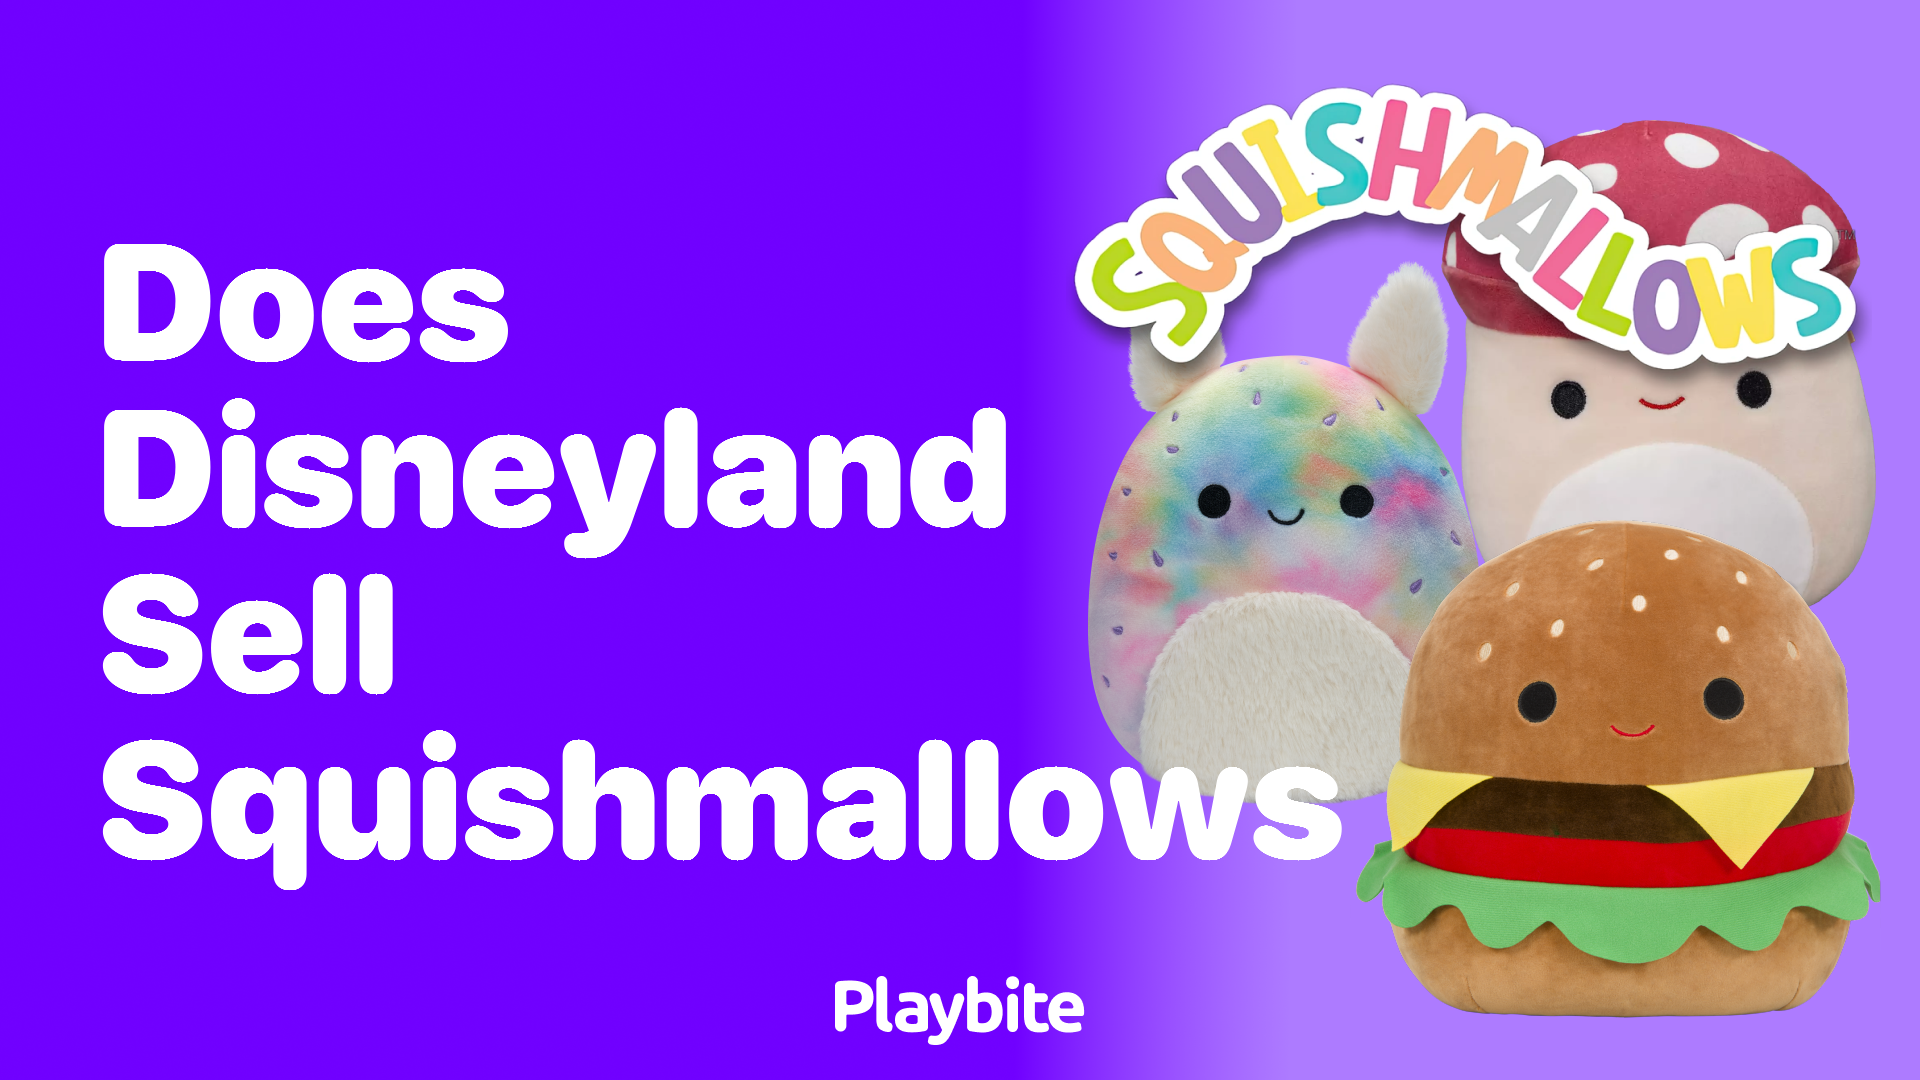 Does Disneyland Sell Squishmallows? Find Out Here!